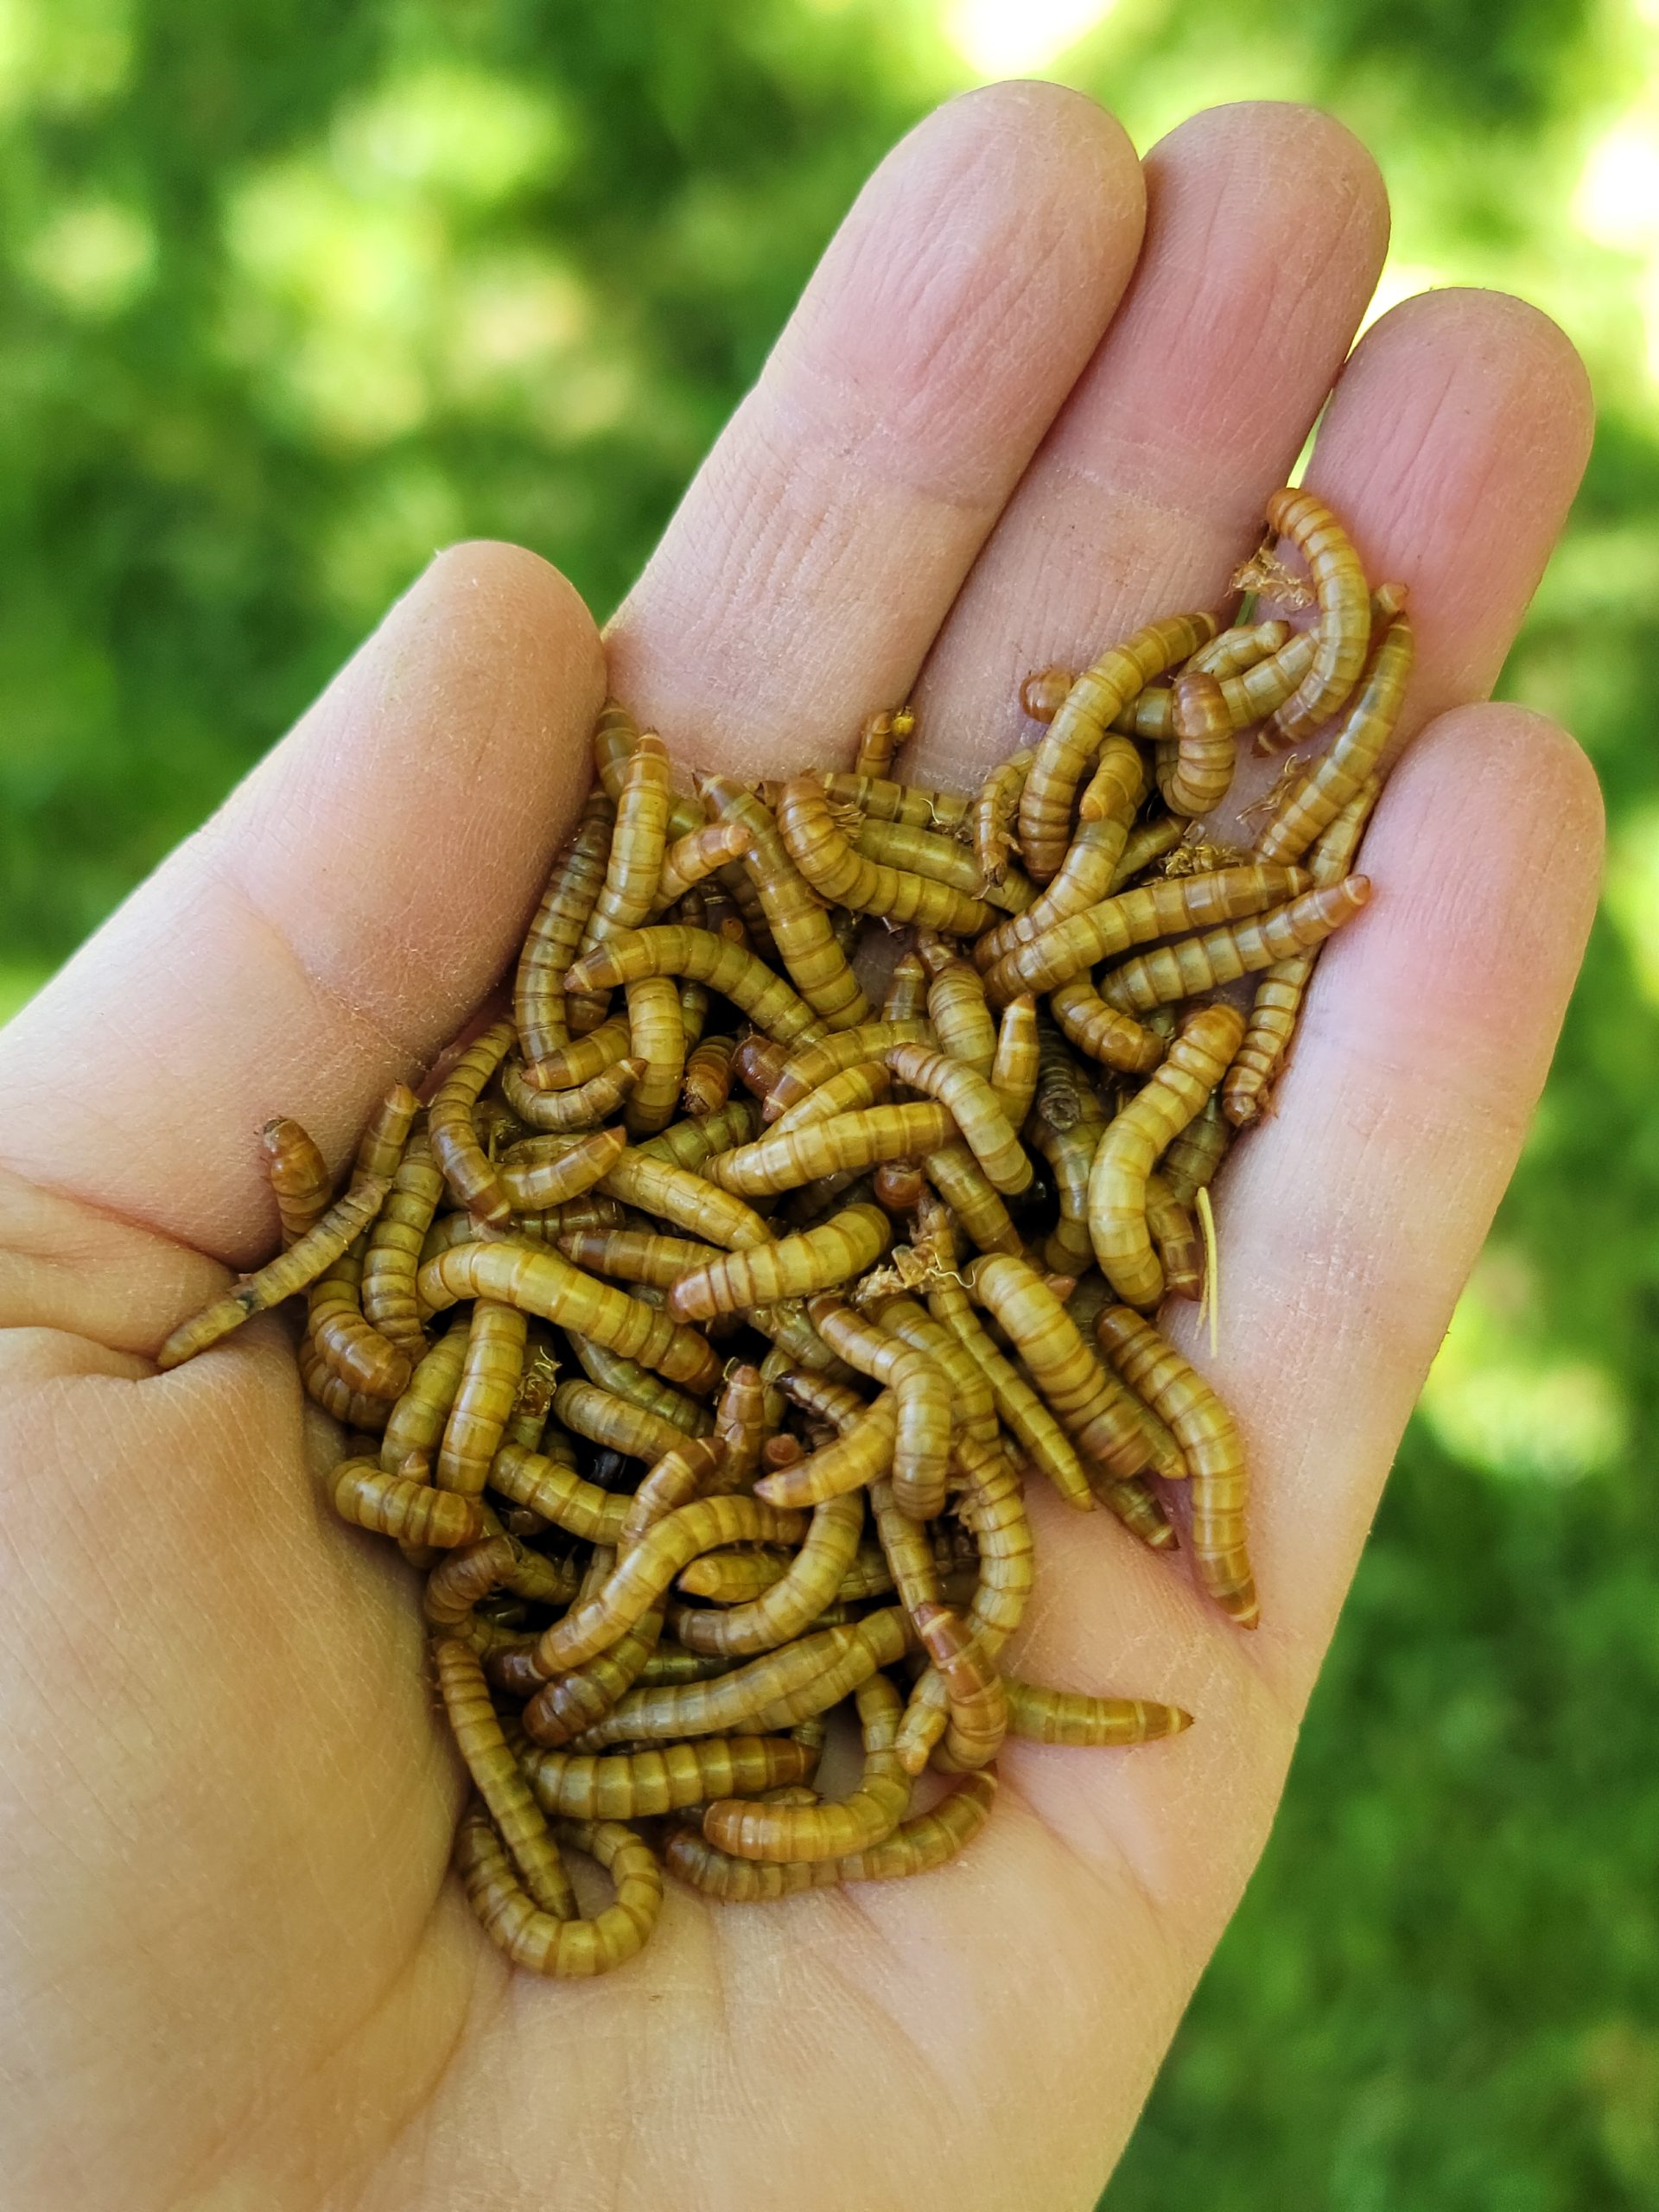 download mealworms near me